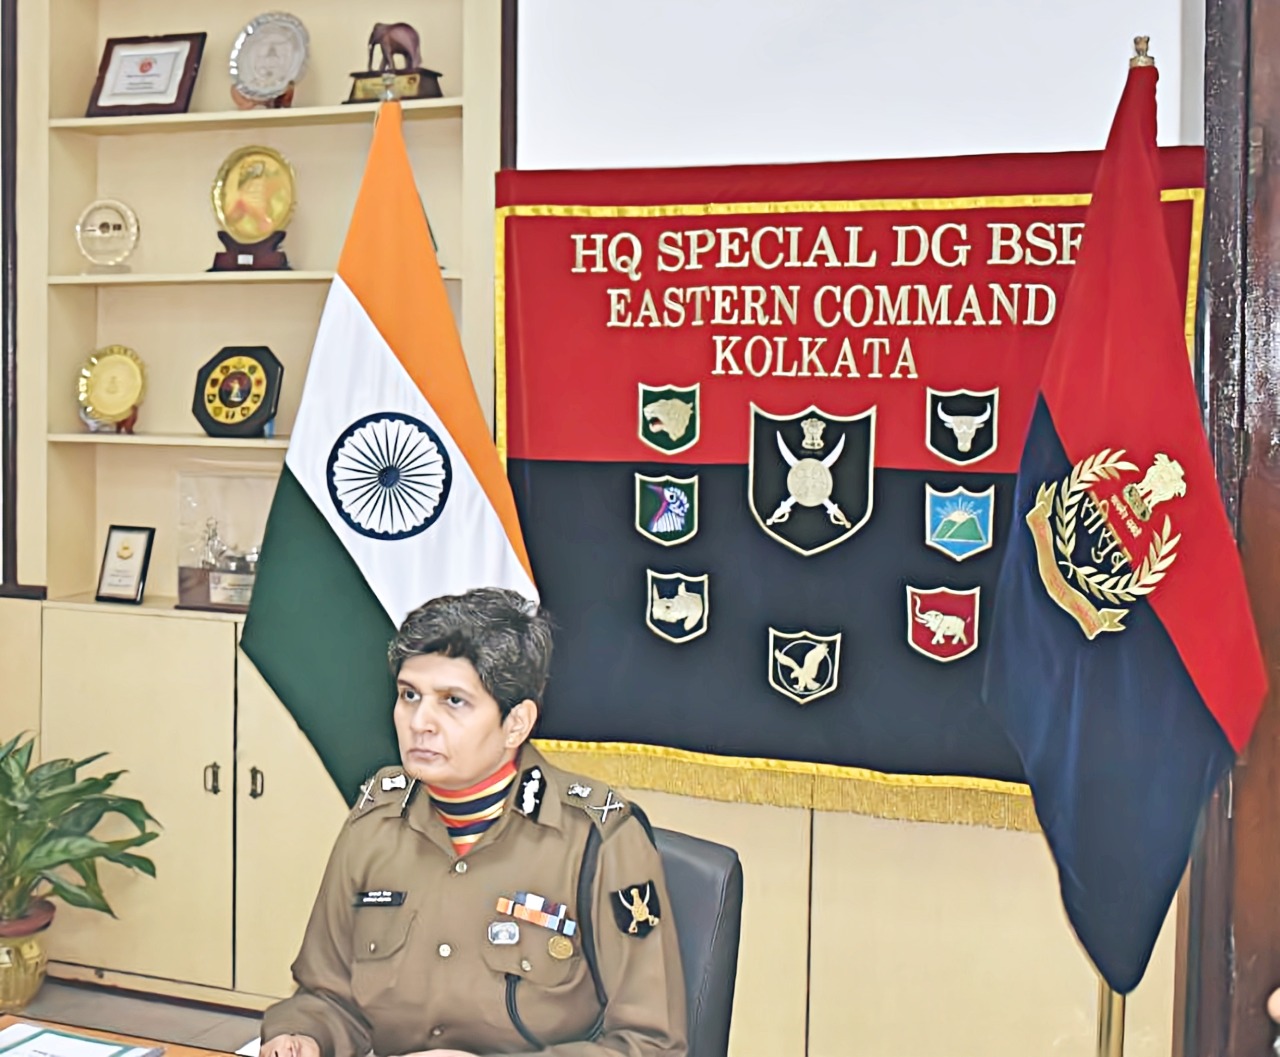 MS SONALI MISHRA, IPS, ADG ASSUMED THE CHARGE OF ADDITIONAL DIRECTOR GENERAL AT HEADQUARTER, SPECIAL DIRECTOR GENERAL, EASTERN COMMAND (KOLKATA)